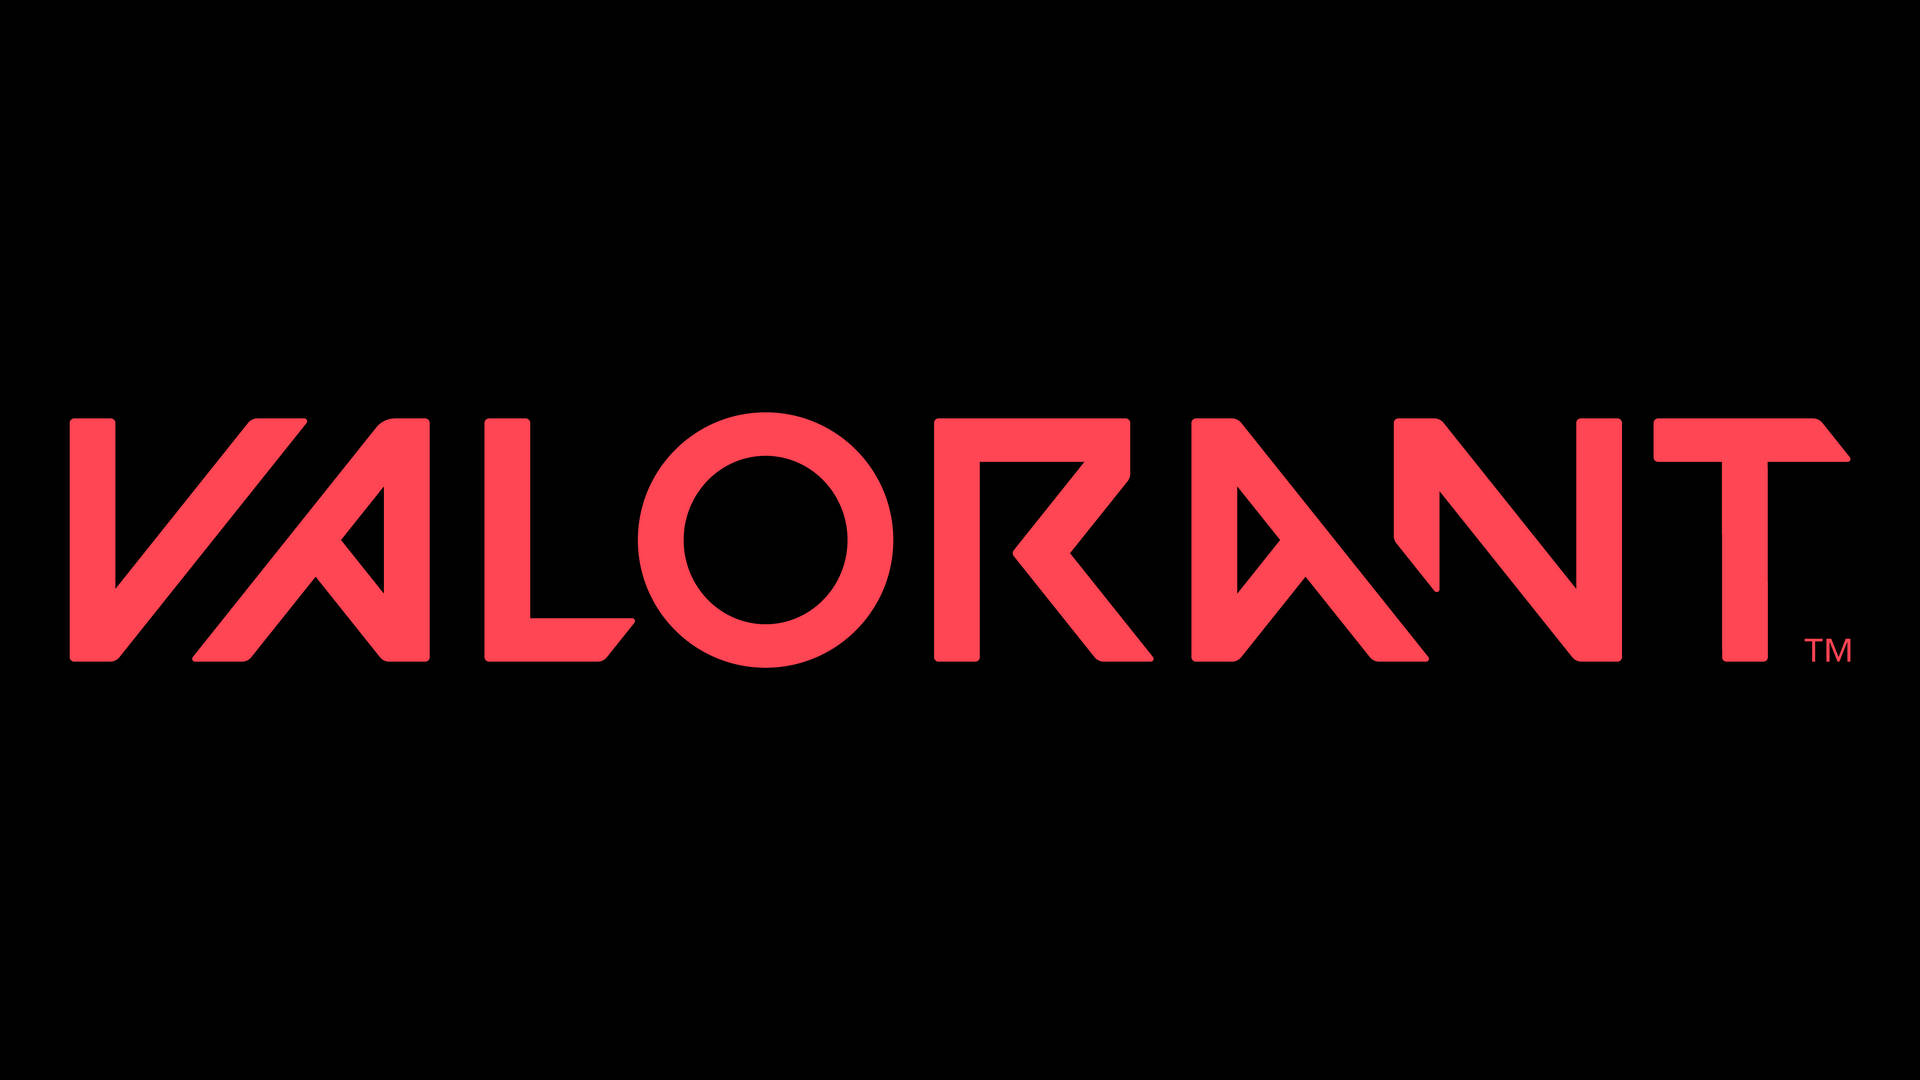 4001X2251 Valorant Wallpaper and Background